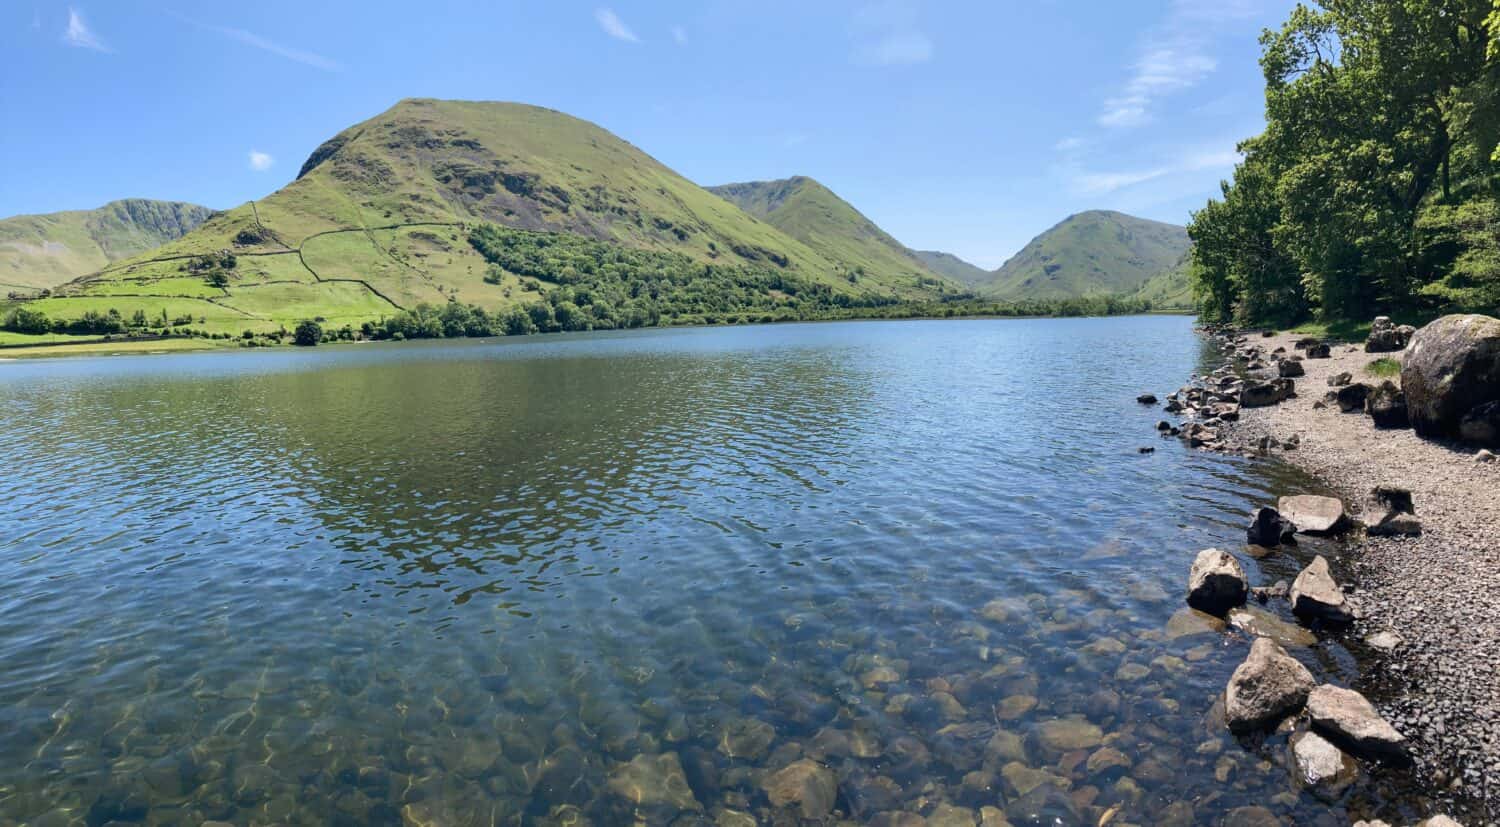 Brotherswater lake in Patterdale in the English Lake District National Park